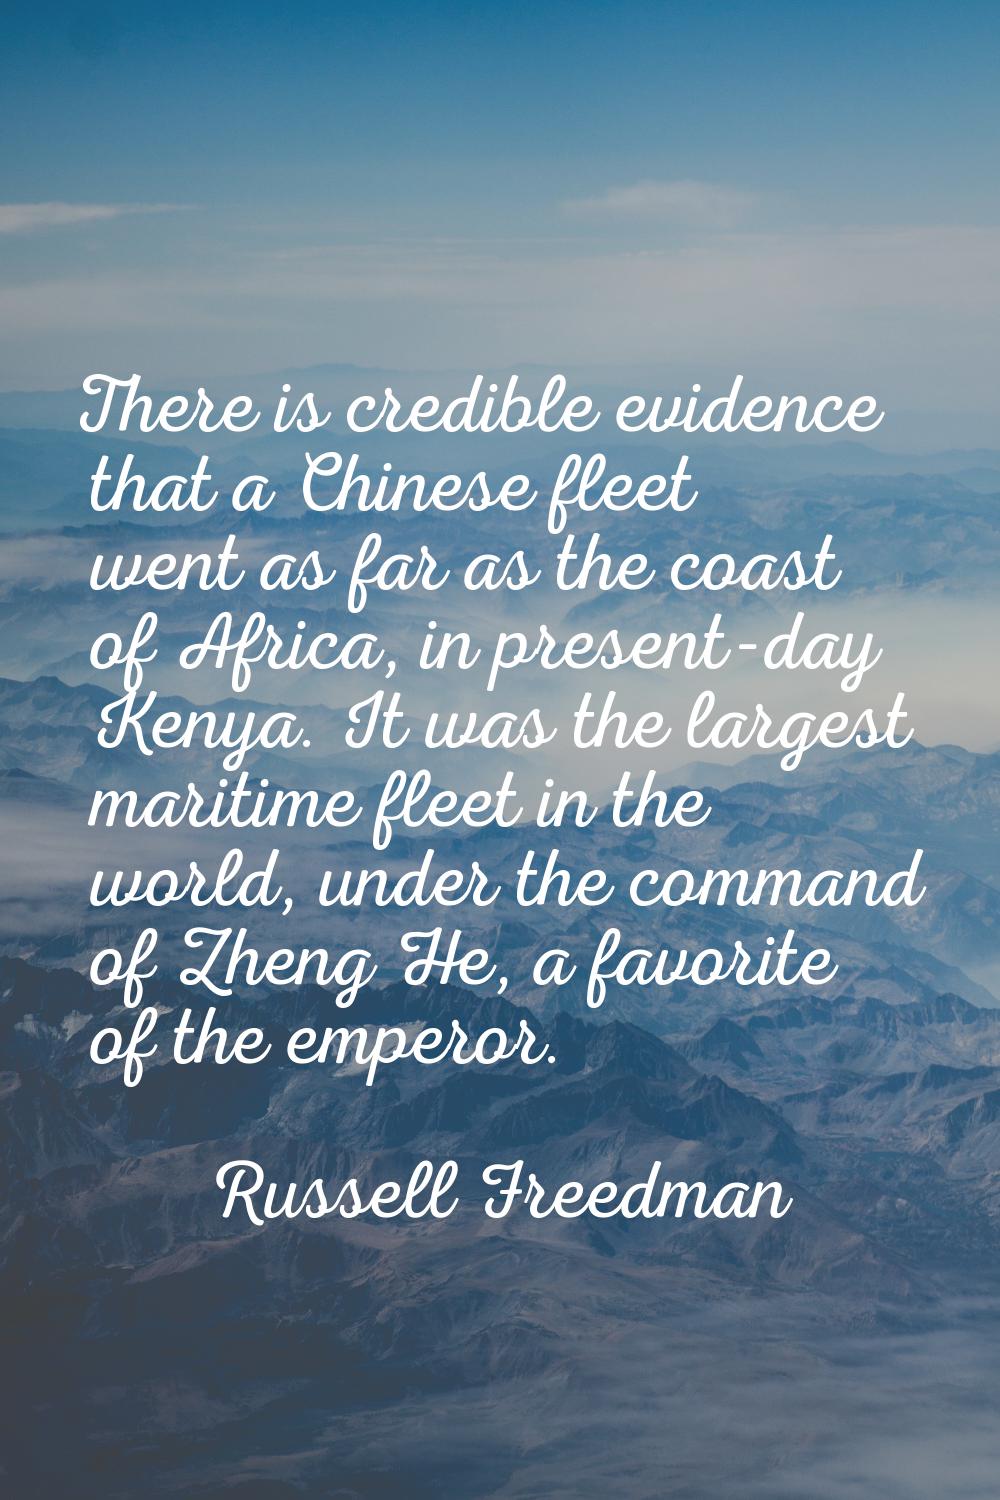 There is credible evidence that a Chinese fleet went as far as the coast of Africa, in present-day 